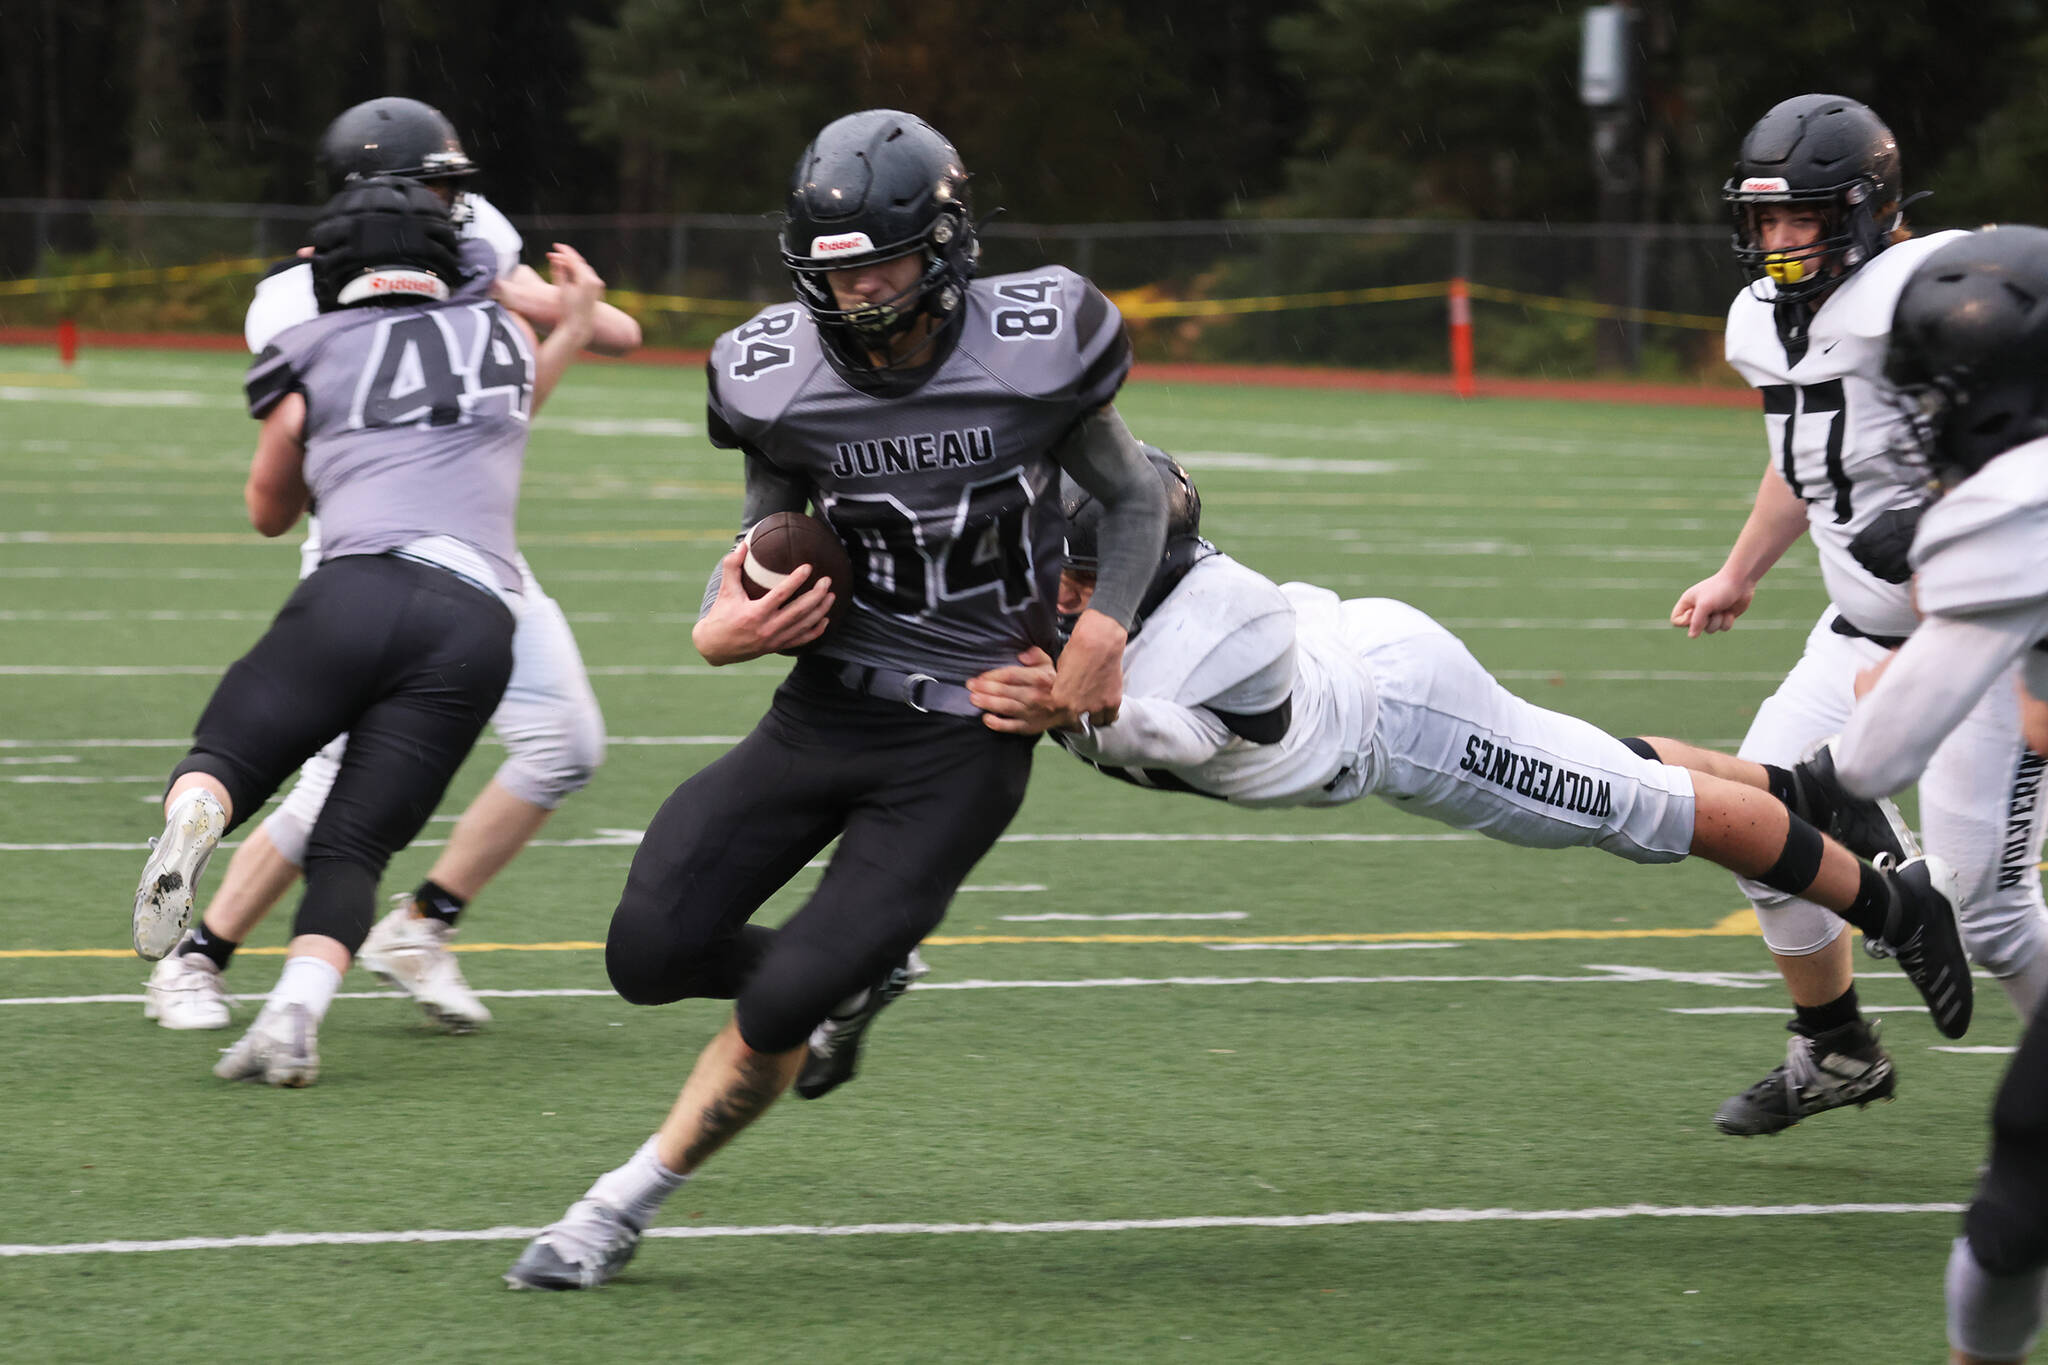 Thomas Baxter runs through an arm tackle on his way to the end zone in the fourth quarter of Saturday’s Huskies win.